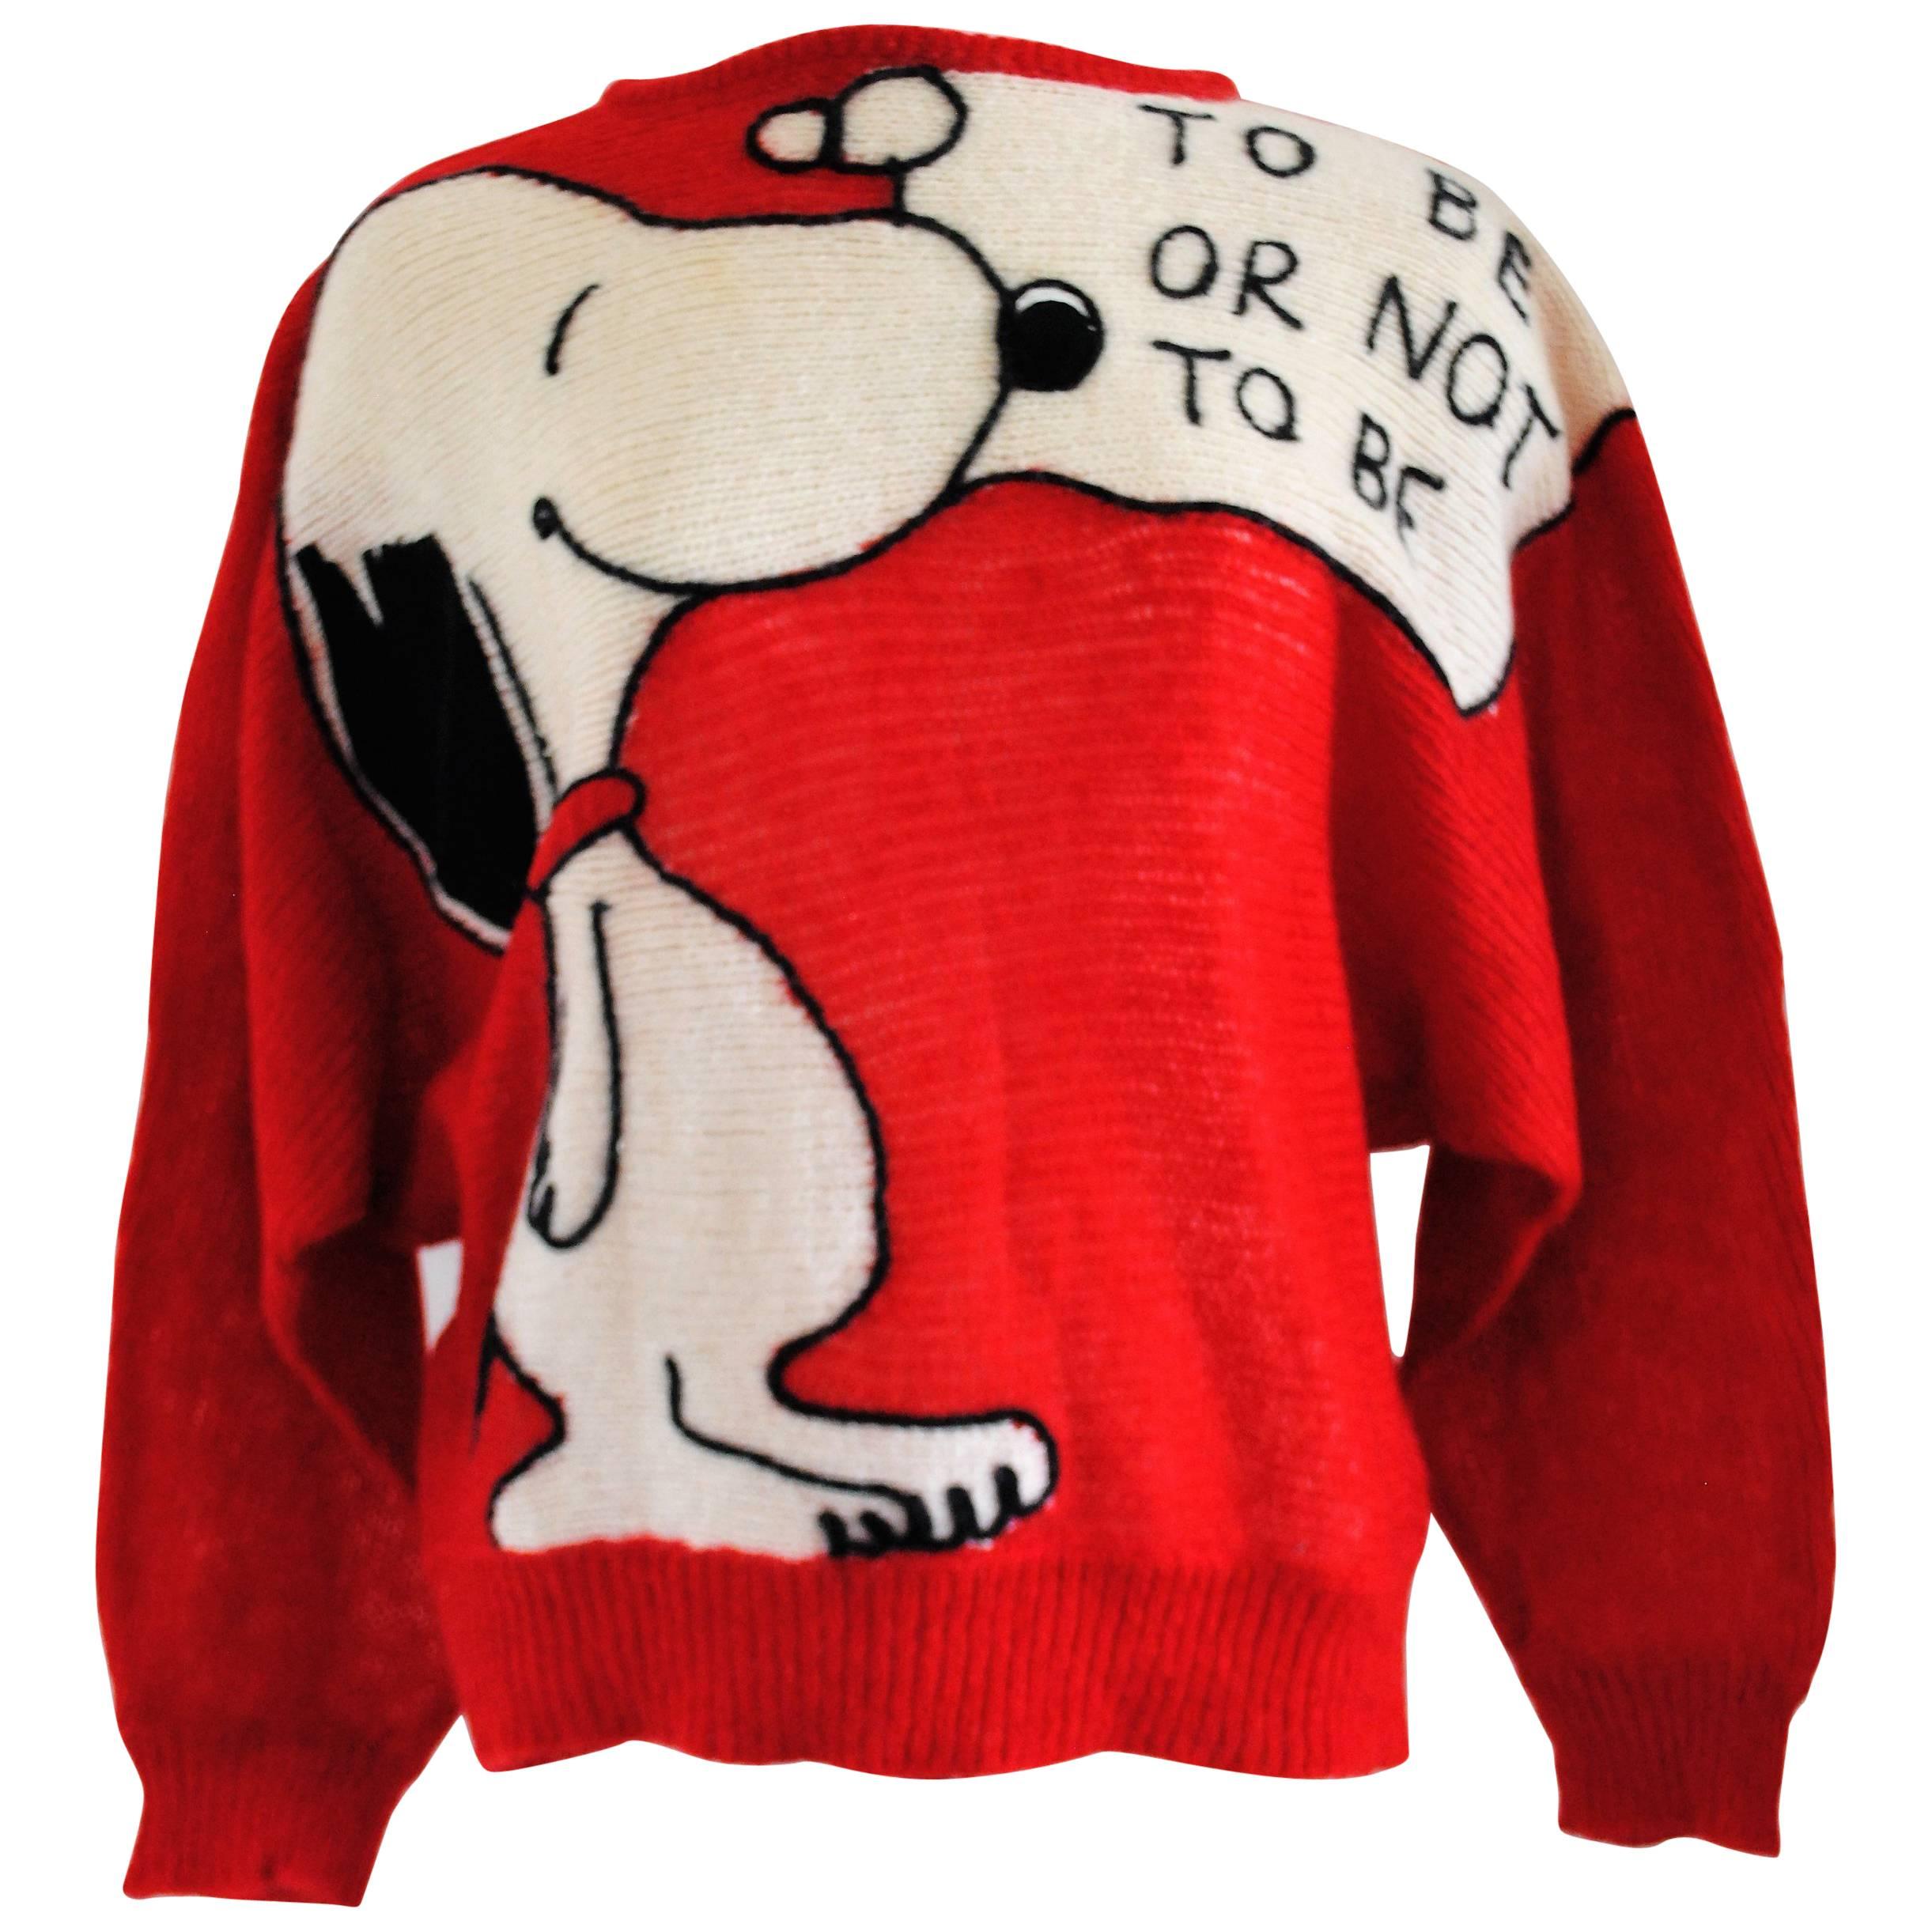 J.C de Castelbajaf for Iceberg red Snoopy sweater "To be or not to be"